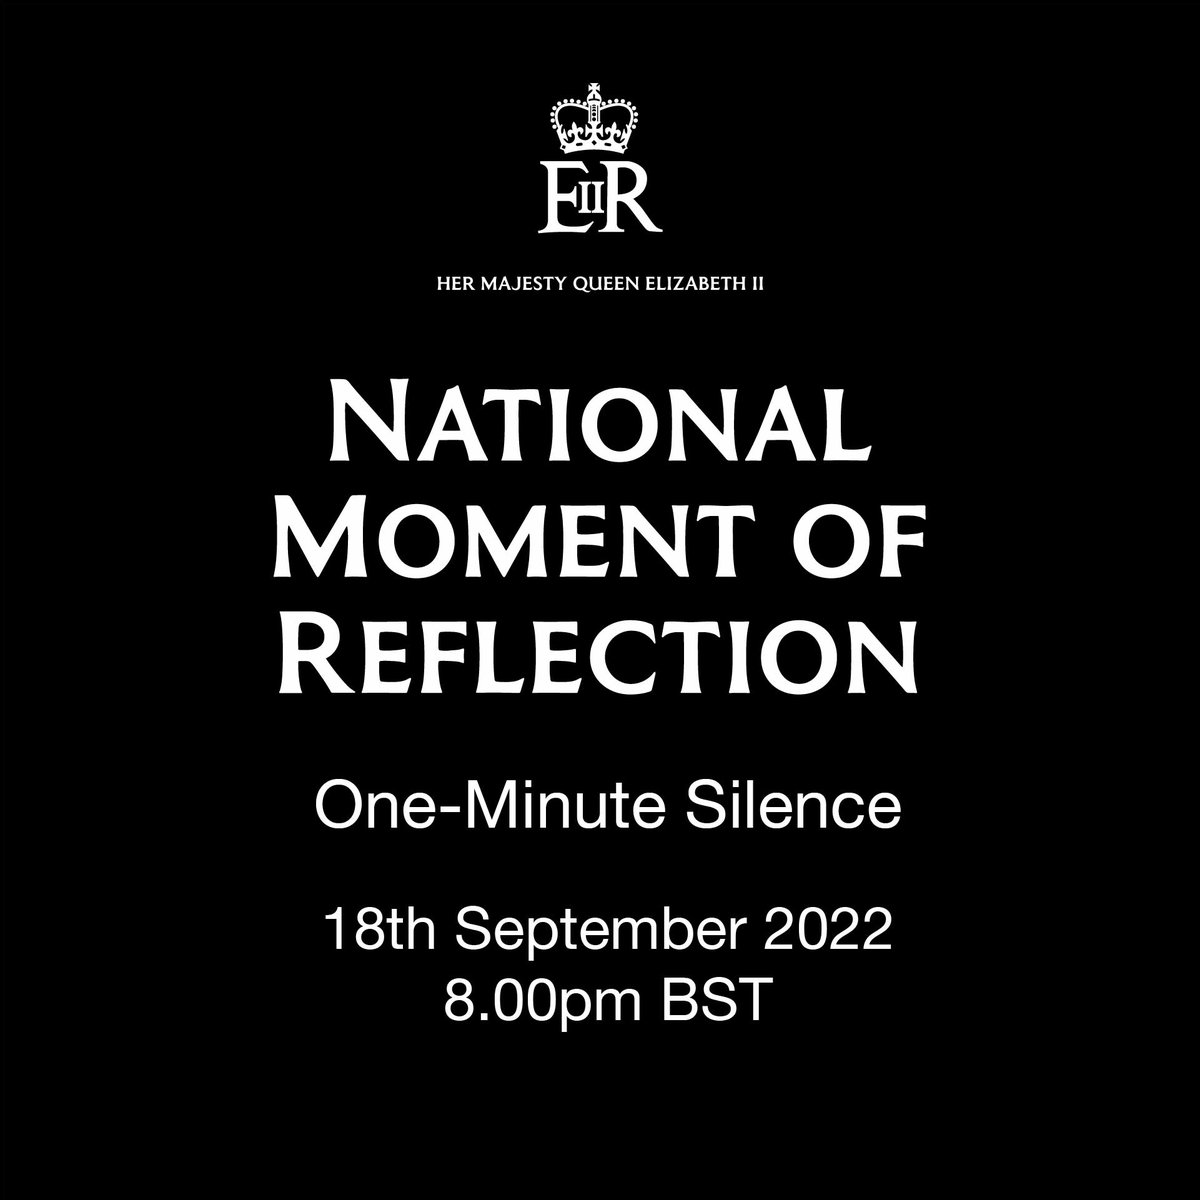 A National Moment of Reflection will take place with a one-minute silence at 8pm tonight to mourn the passing of Her Majesty Queen Elizabeth II and reflect on her life and legacy